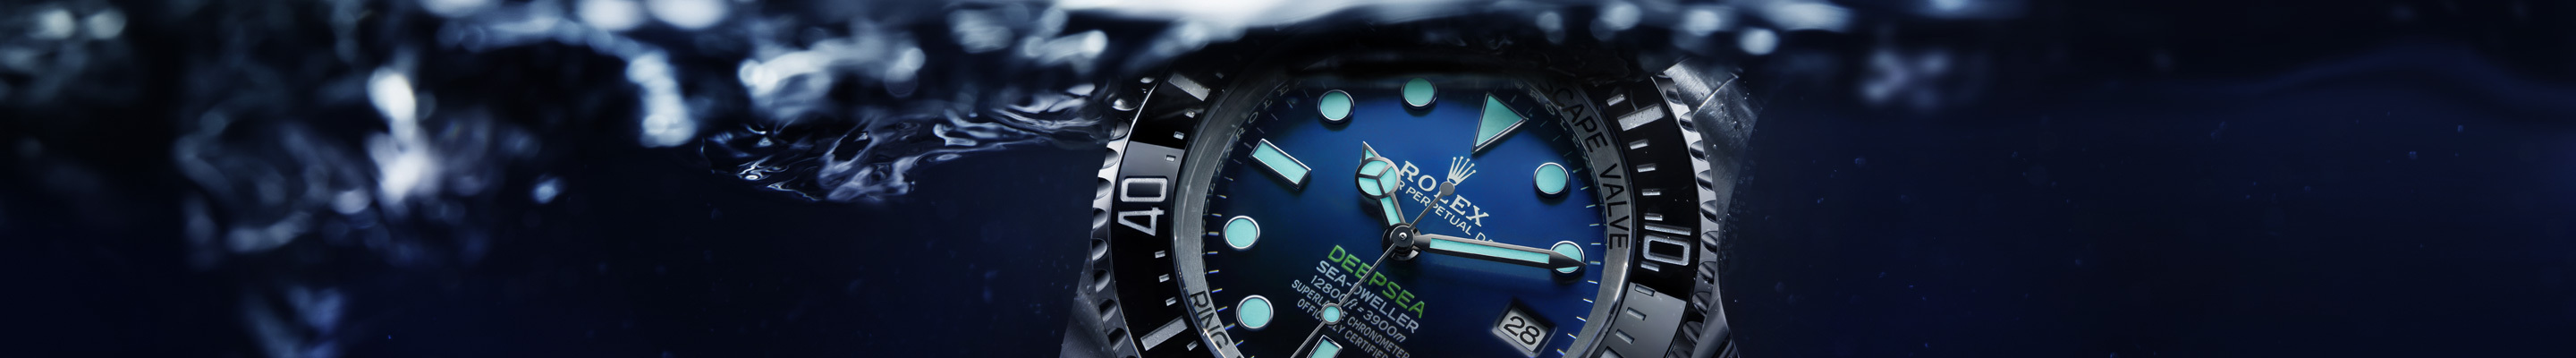 Rolex Deepsea Watches at Chow Tai Fook